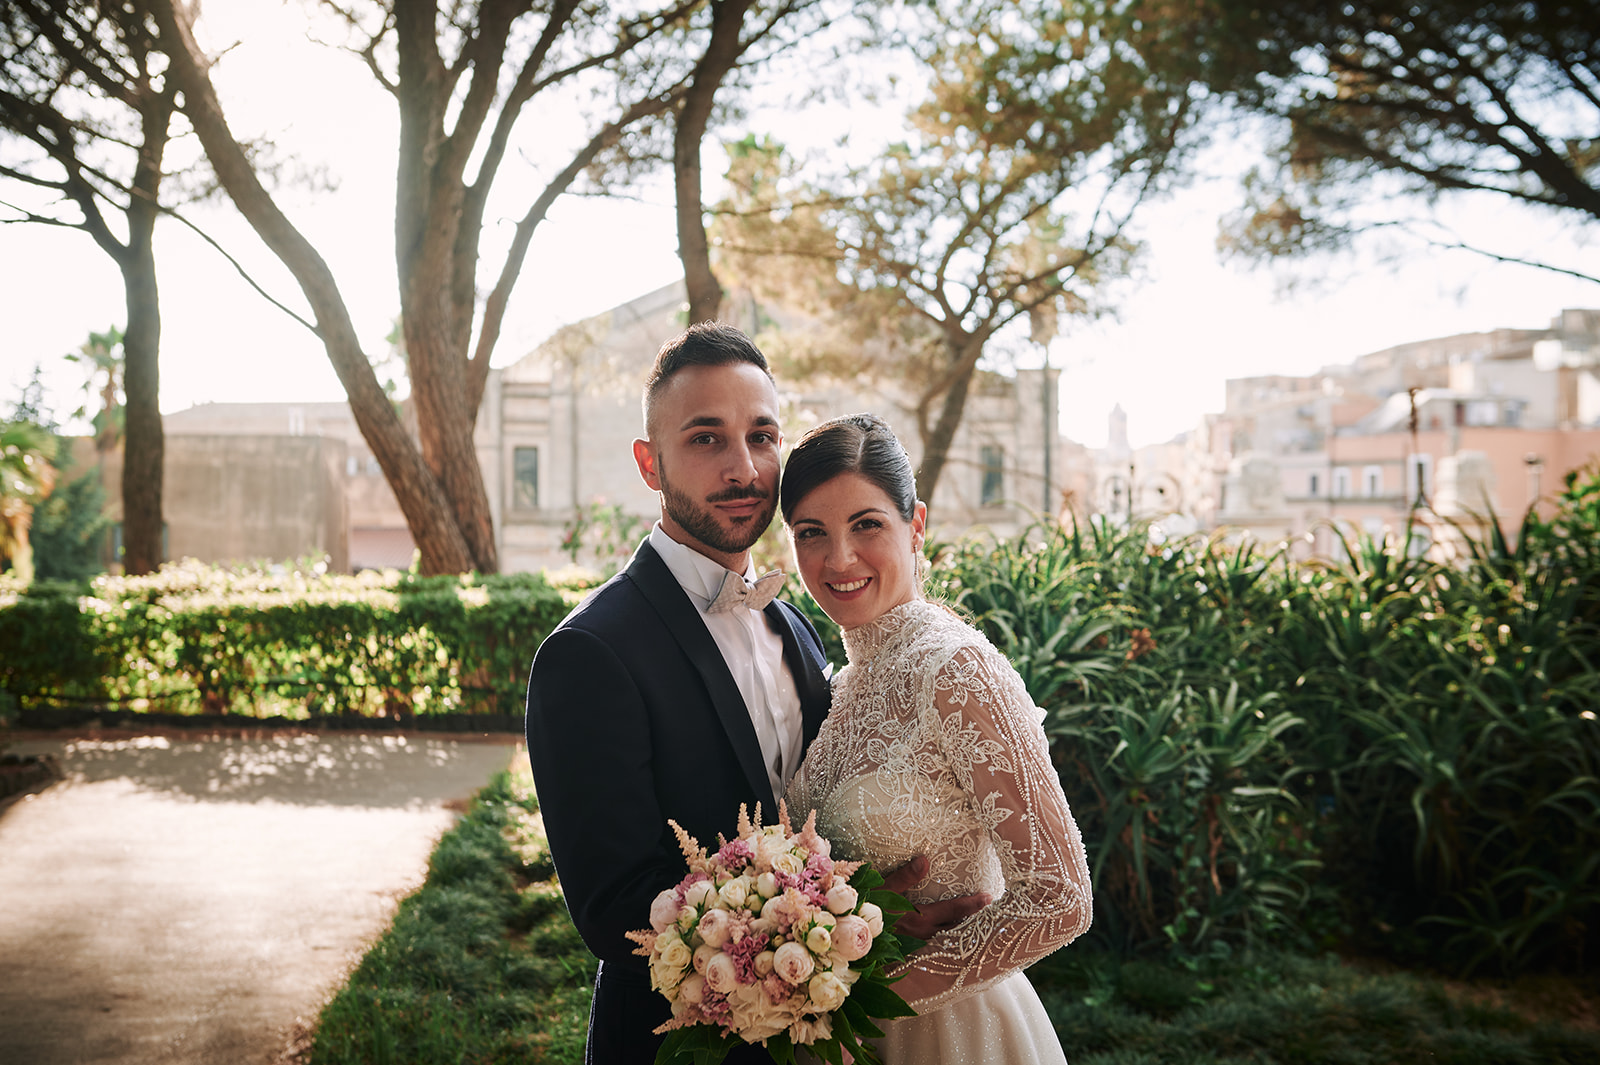 The lovely town of Caltagirone as a backdrop for Marianna and Mattia's photo shoot